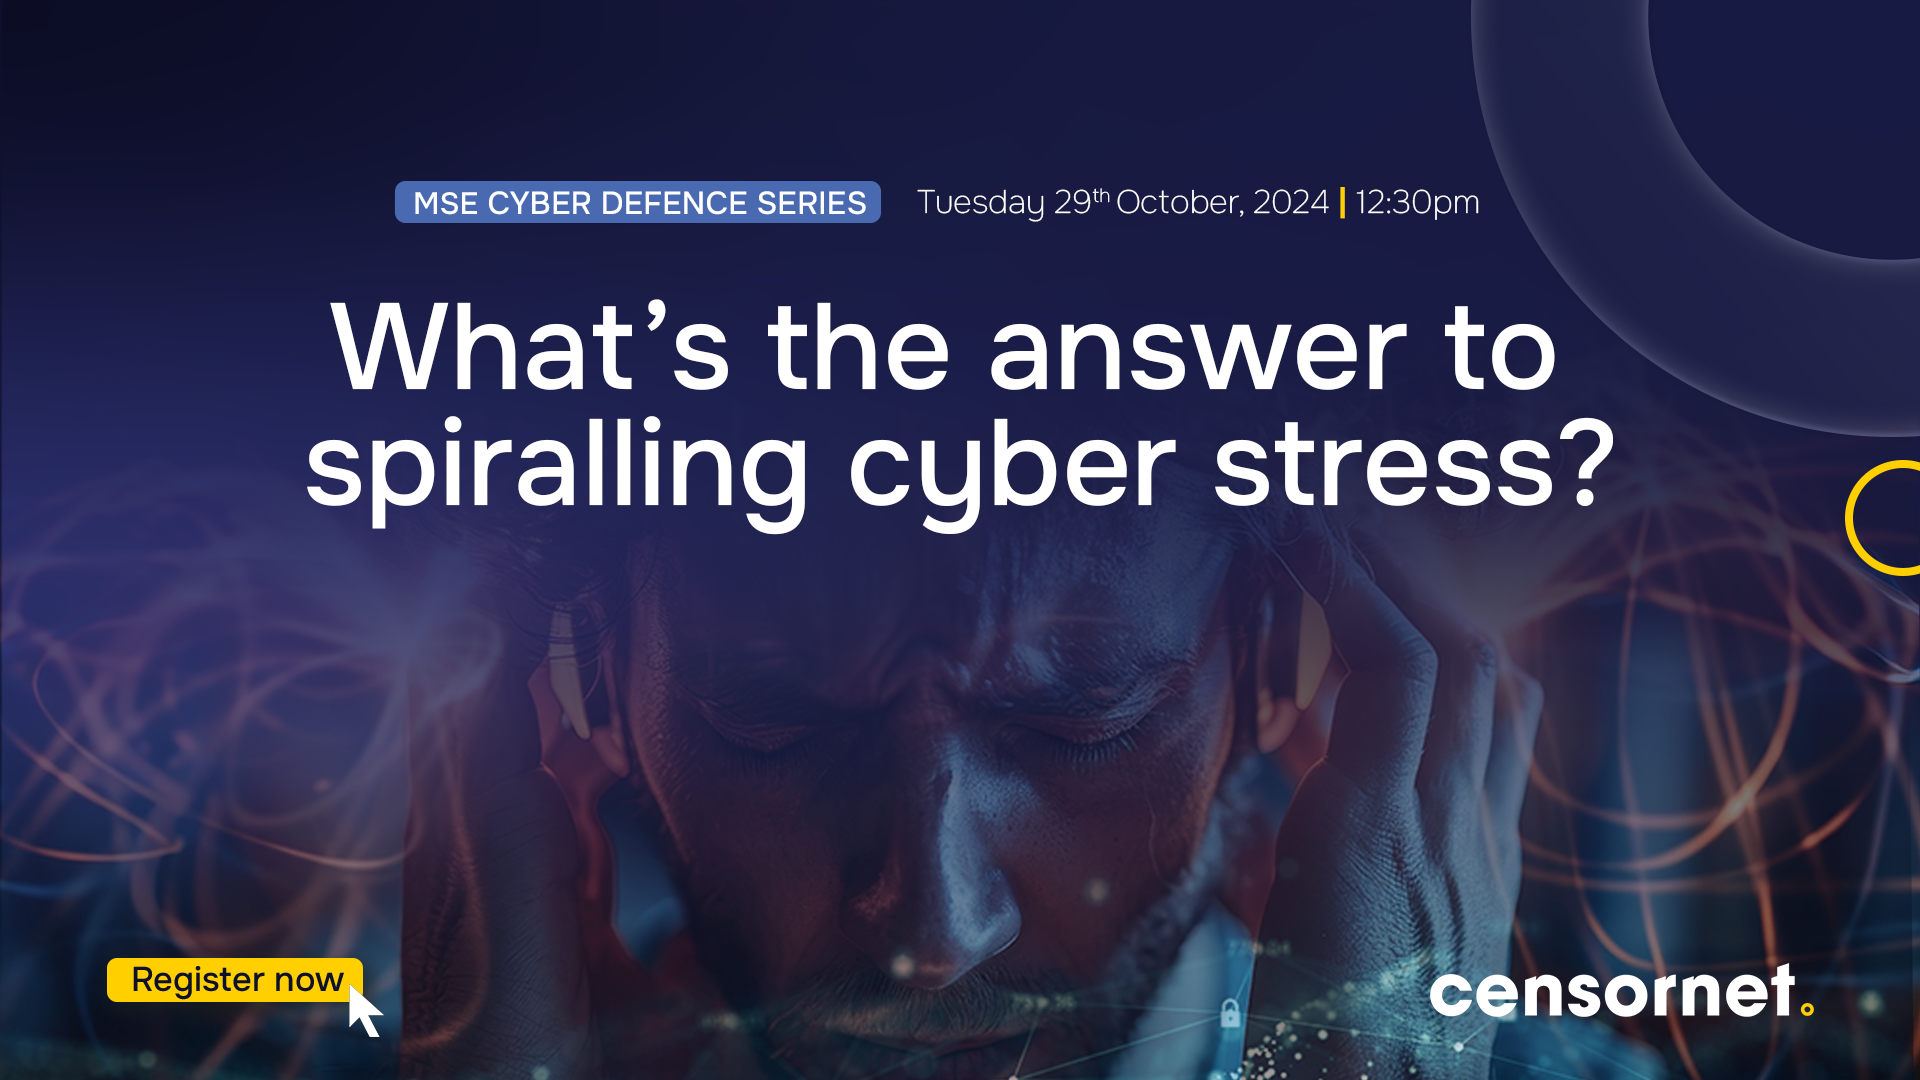 What’s the answer to spiralling cybersecurity stress levels?